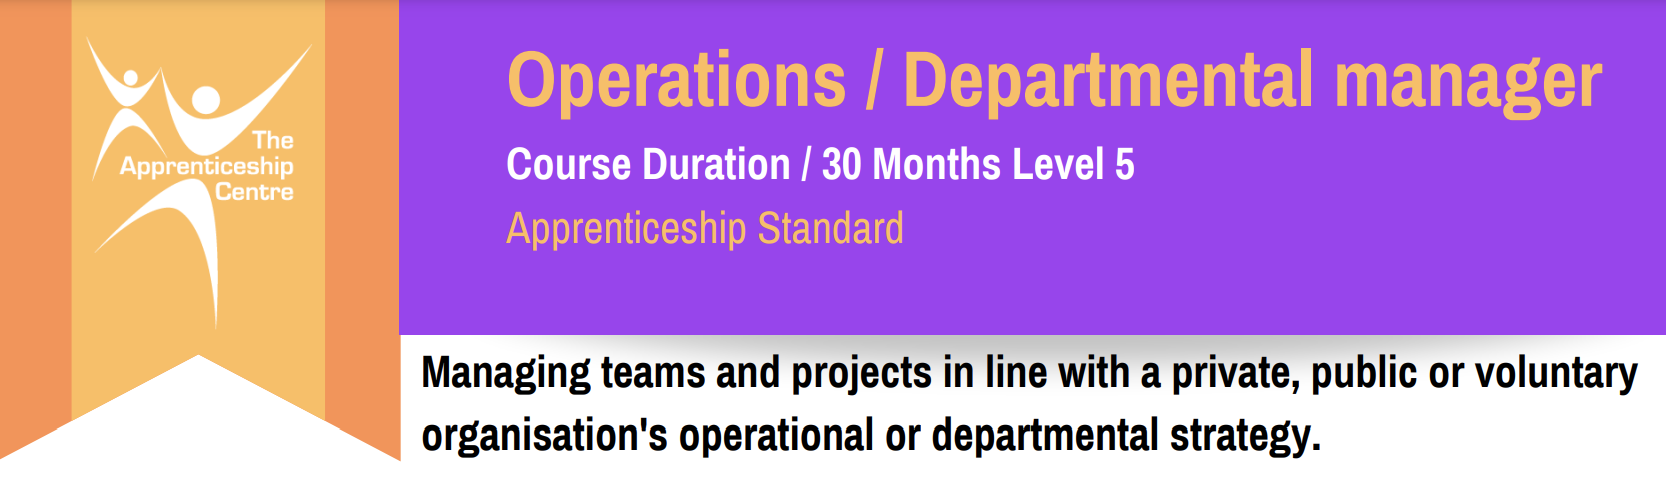 Operations/Departmental Manager Level 5